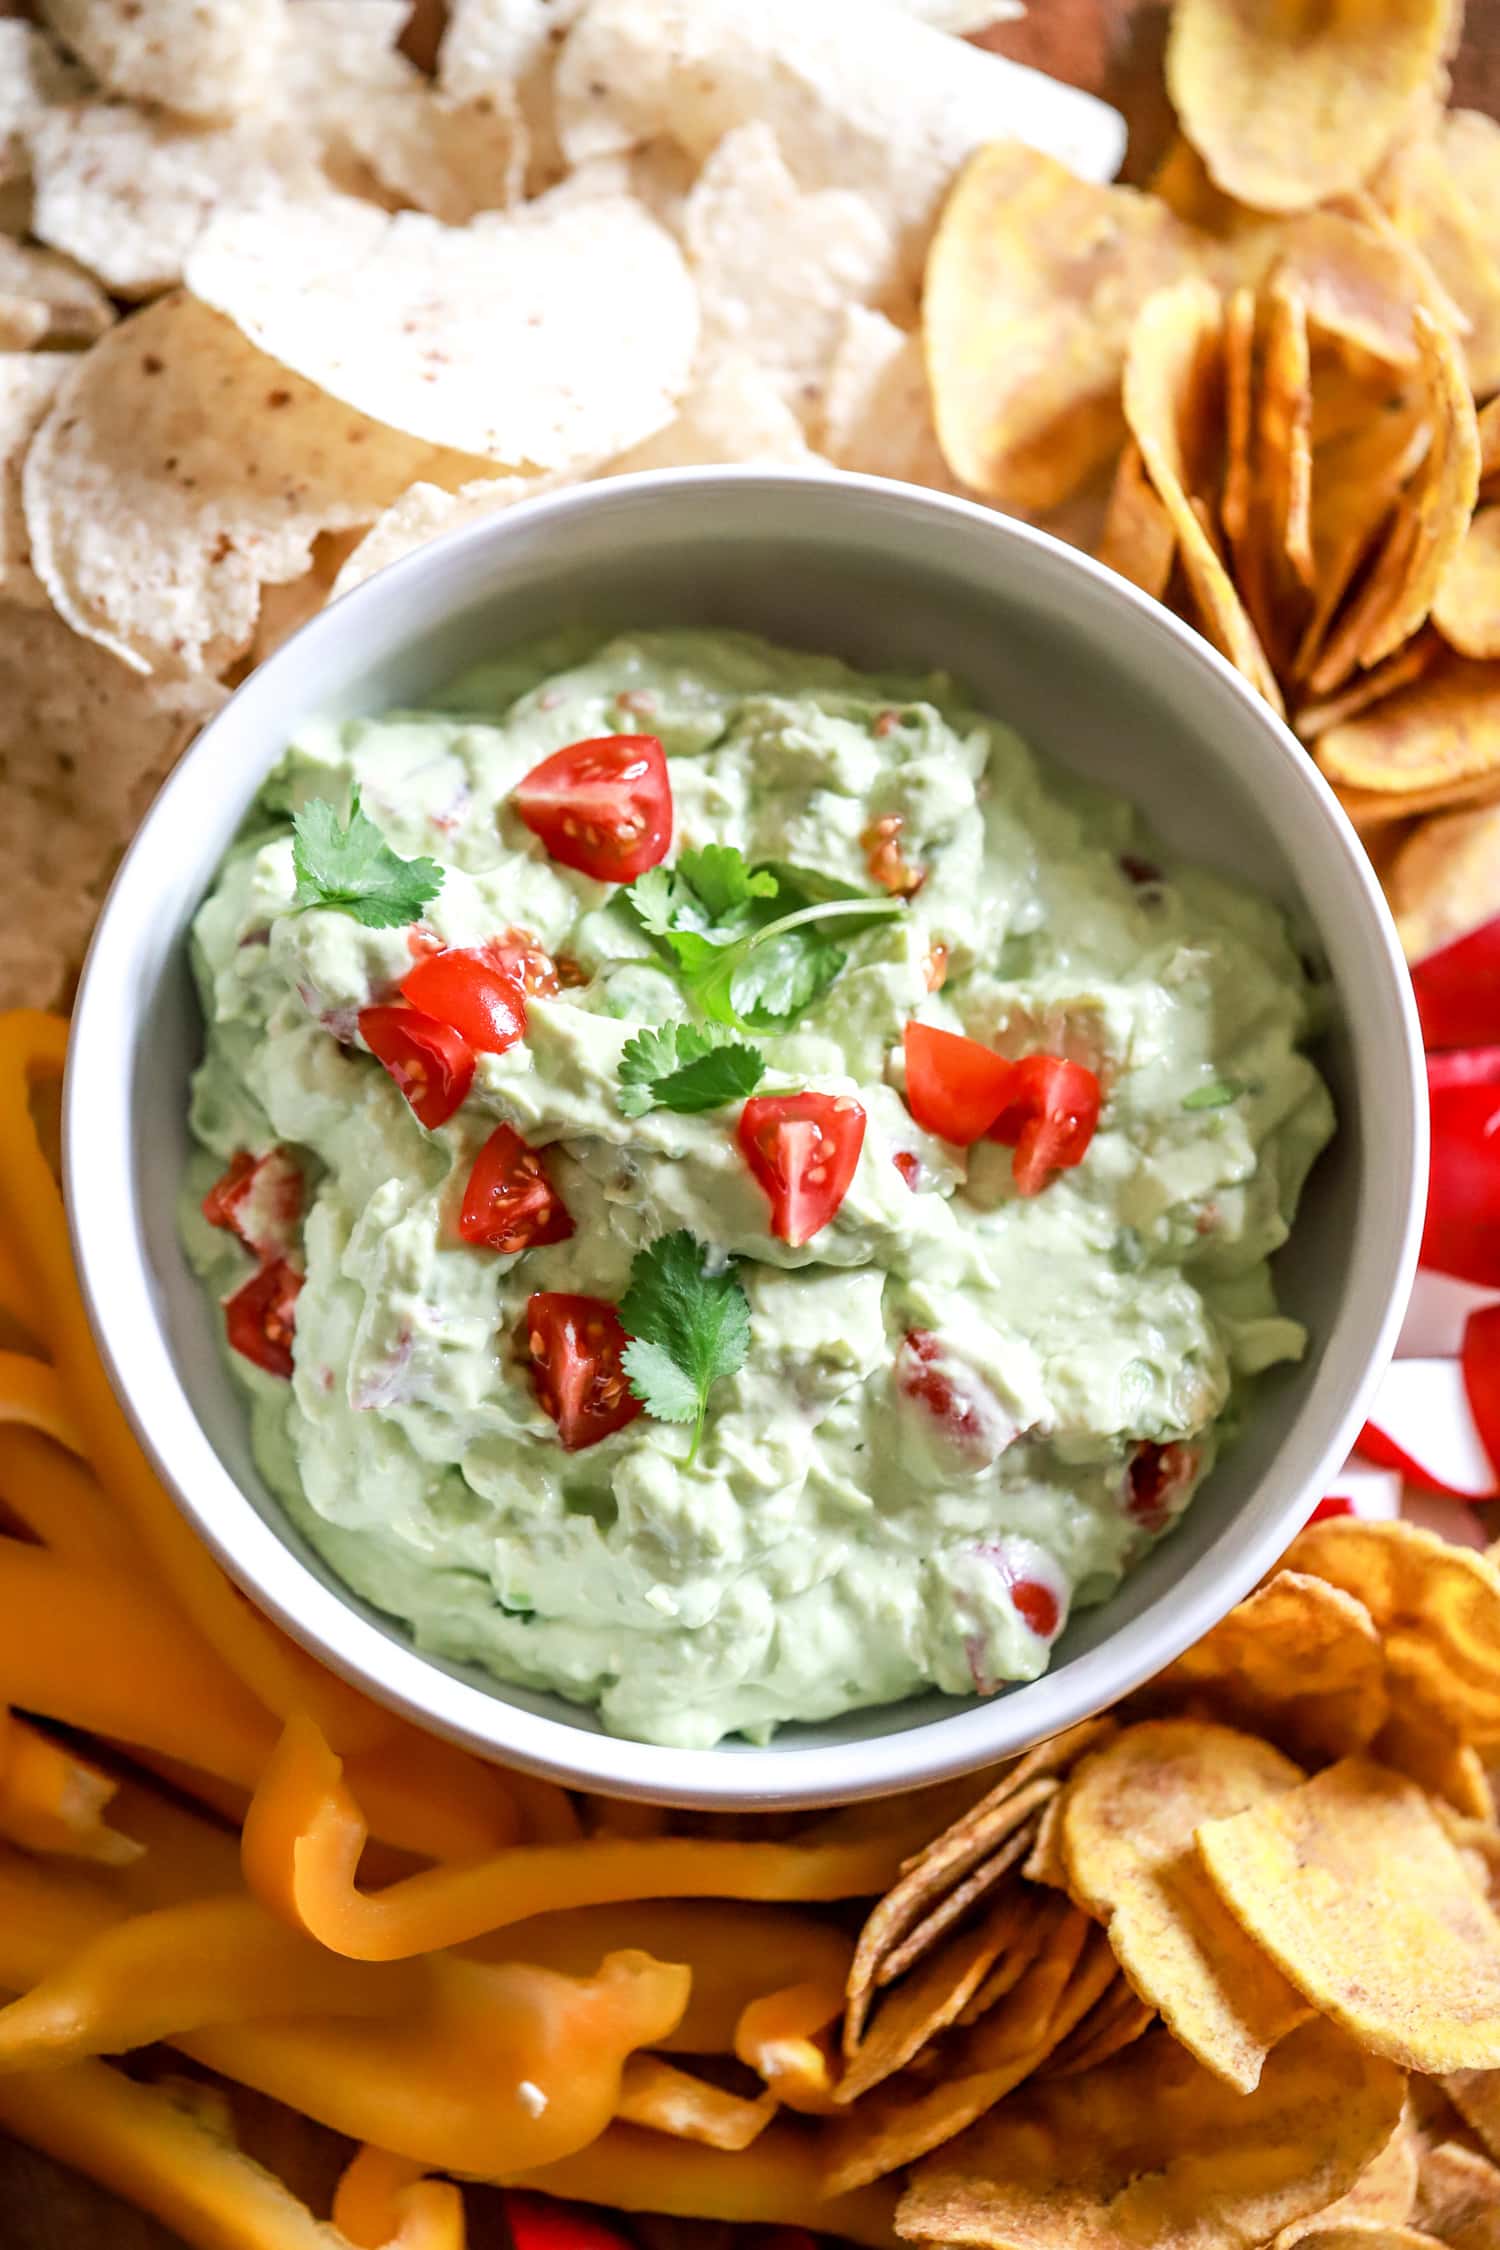 bowl of homemade sour cream guacamole surrounded by peppers and plaintain chips for dipping.